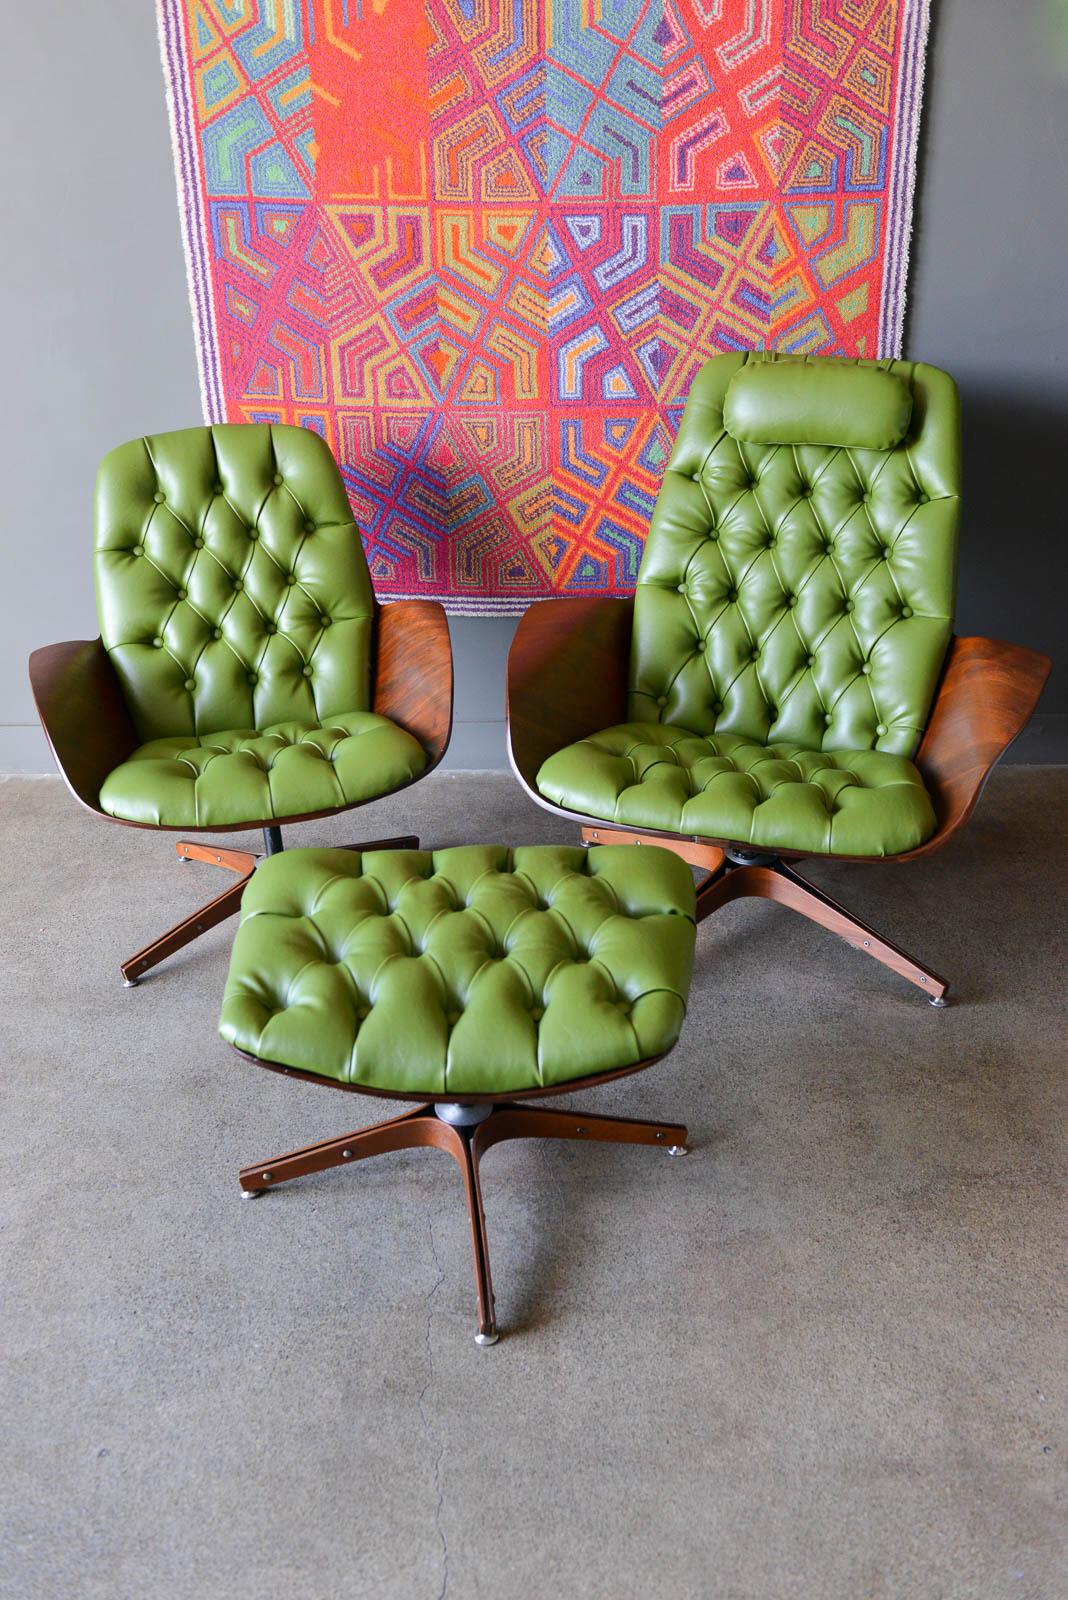 Mr. and Mrs. Chairs with ottoman by George Mulhauser for Plycraft, ca. 1960. Professionally restored walnut veneer with beautiful avocado green upholstery with new foam. Restored from the frame up and in showroom condition. This rare and hard to